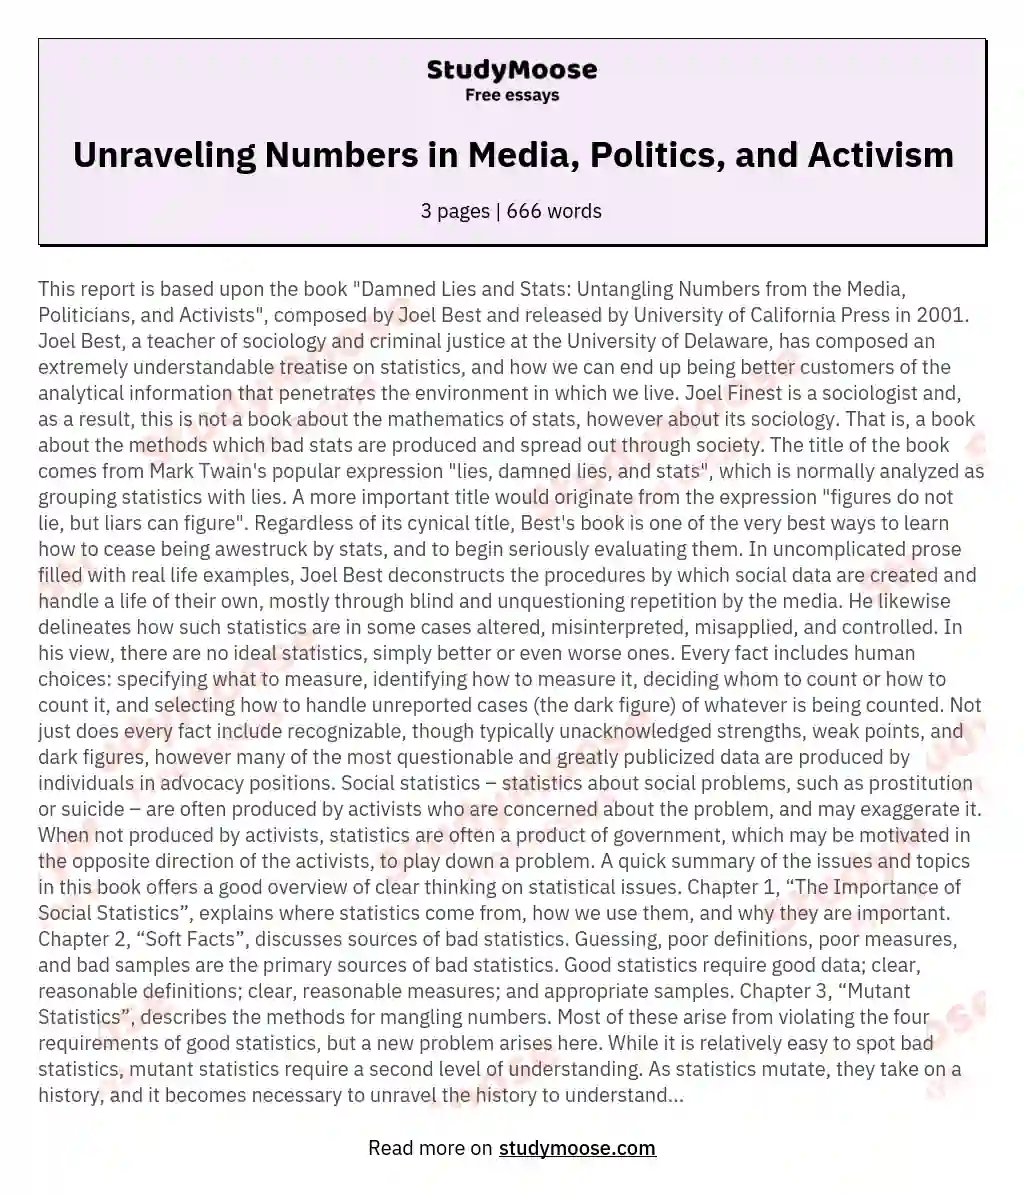 Unraveling Numbers in Media, Politics, and Activism essay